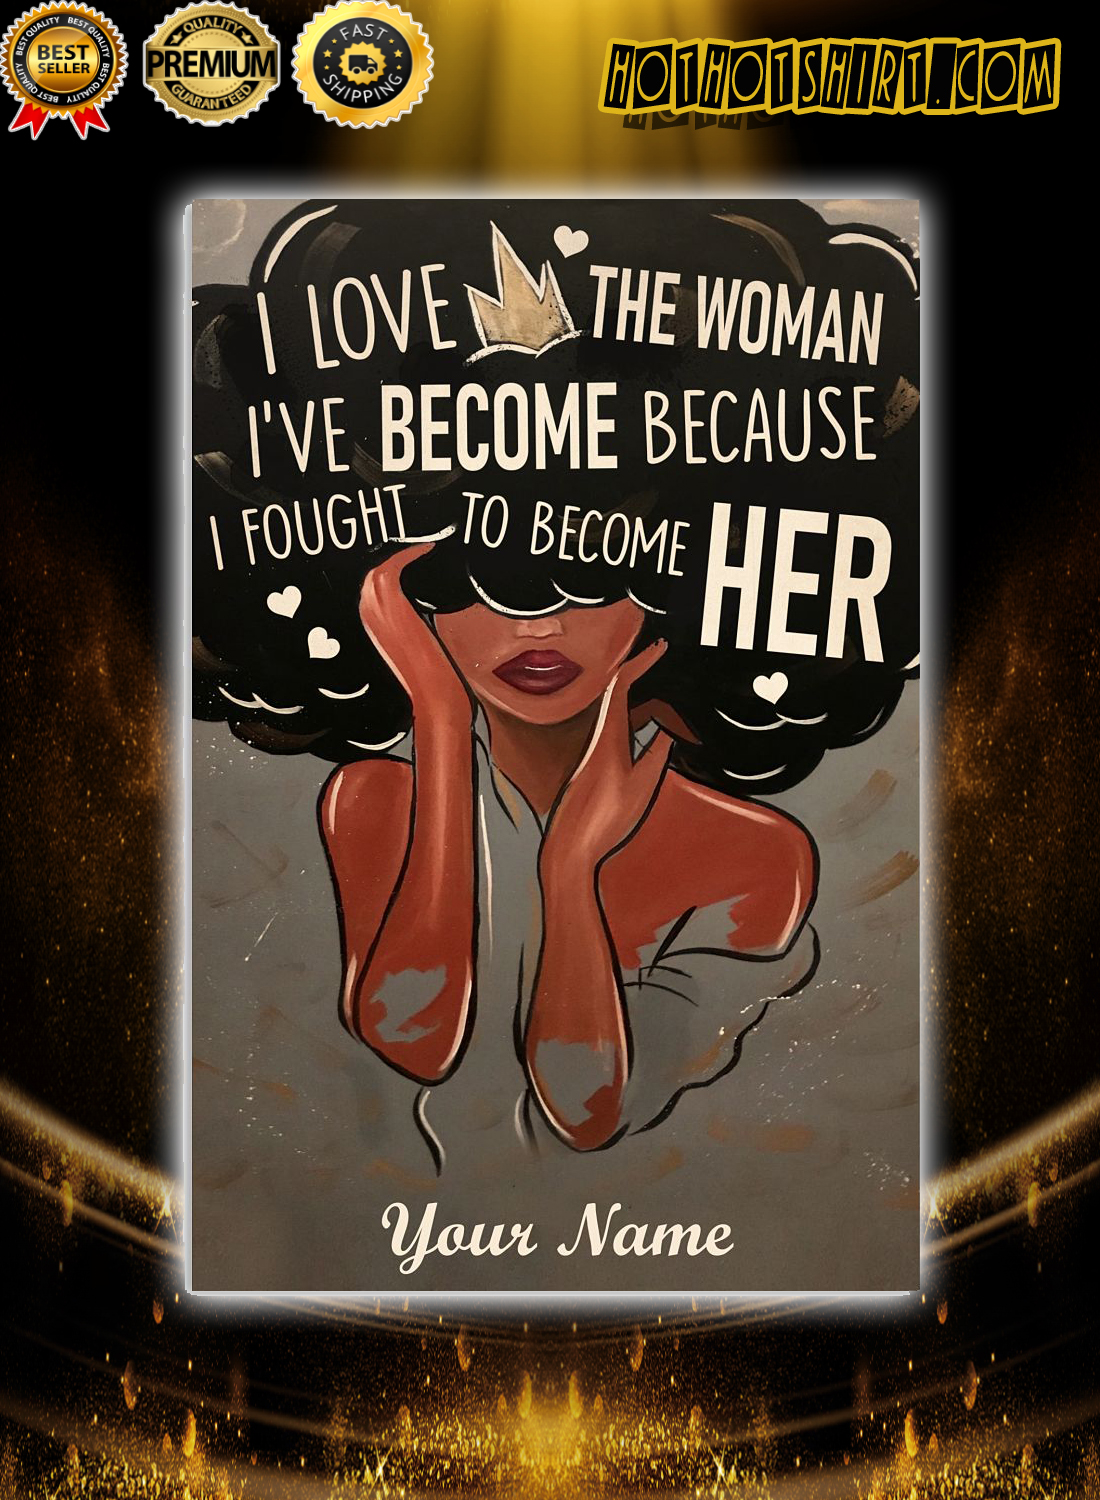 Personalized Name Black I Love The Woman Poster